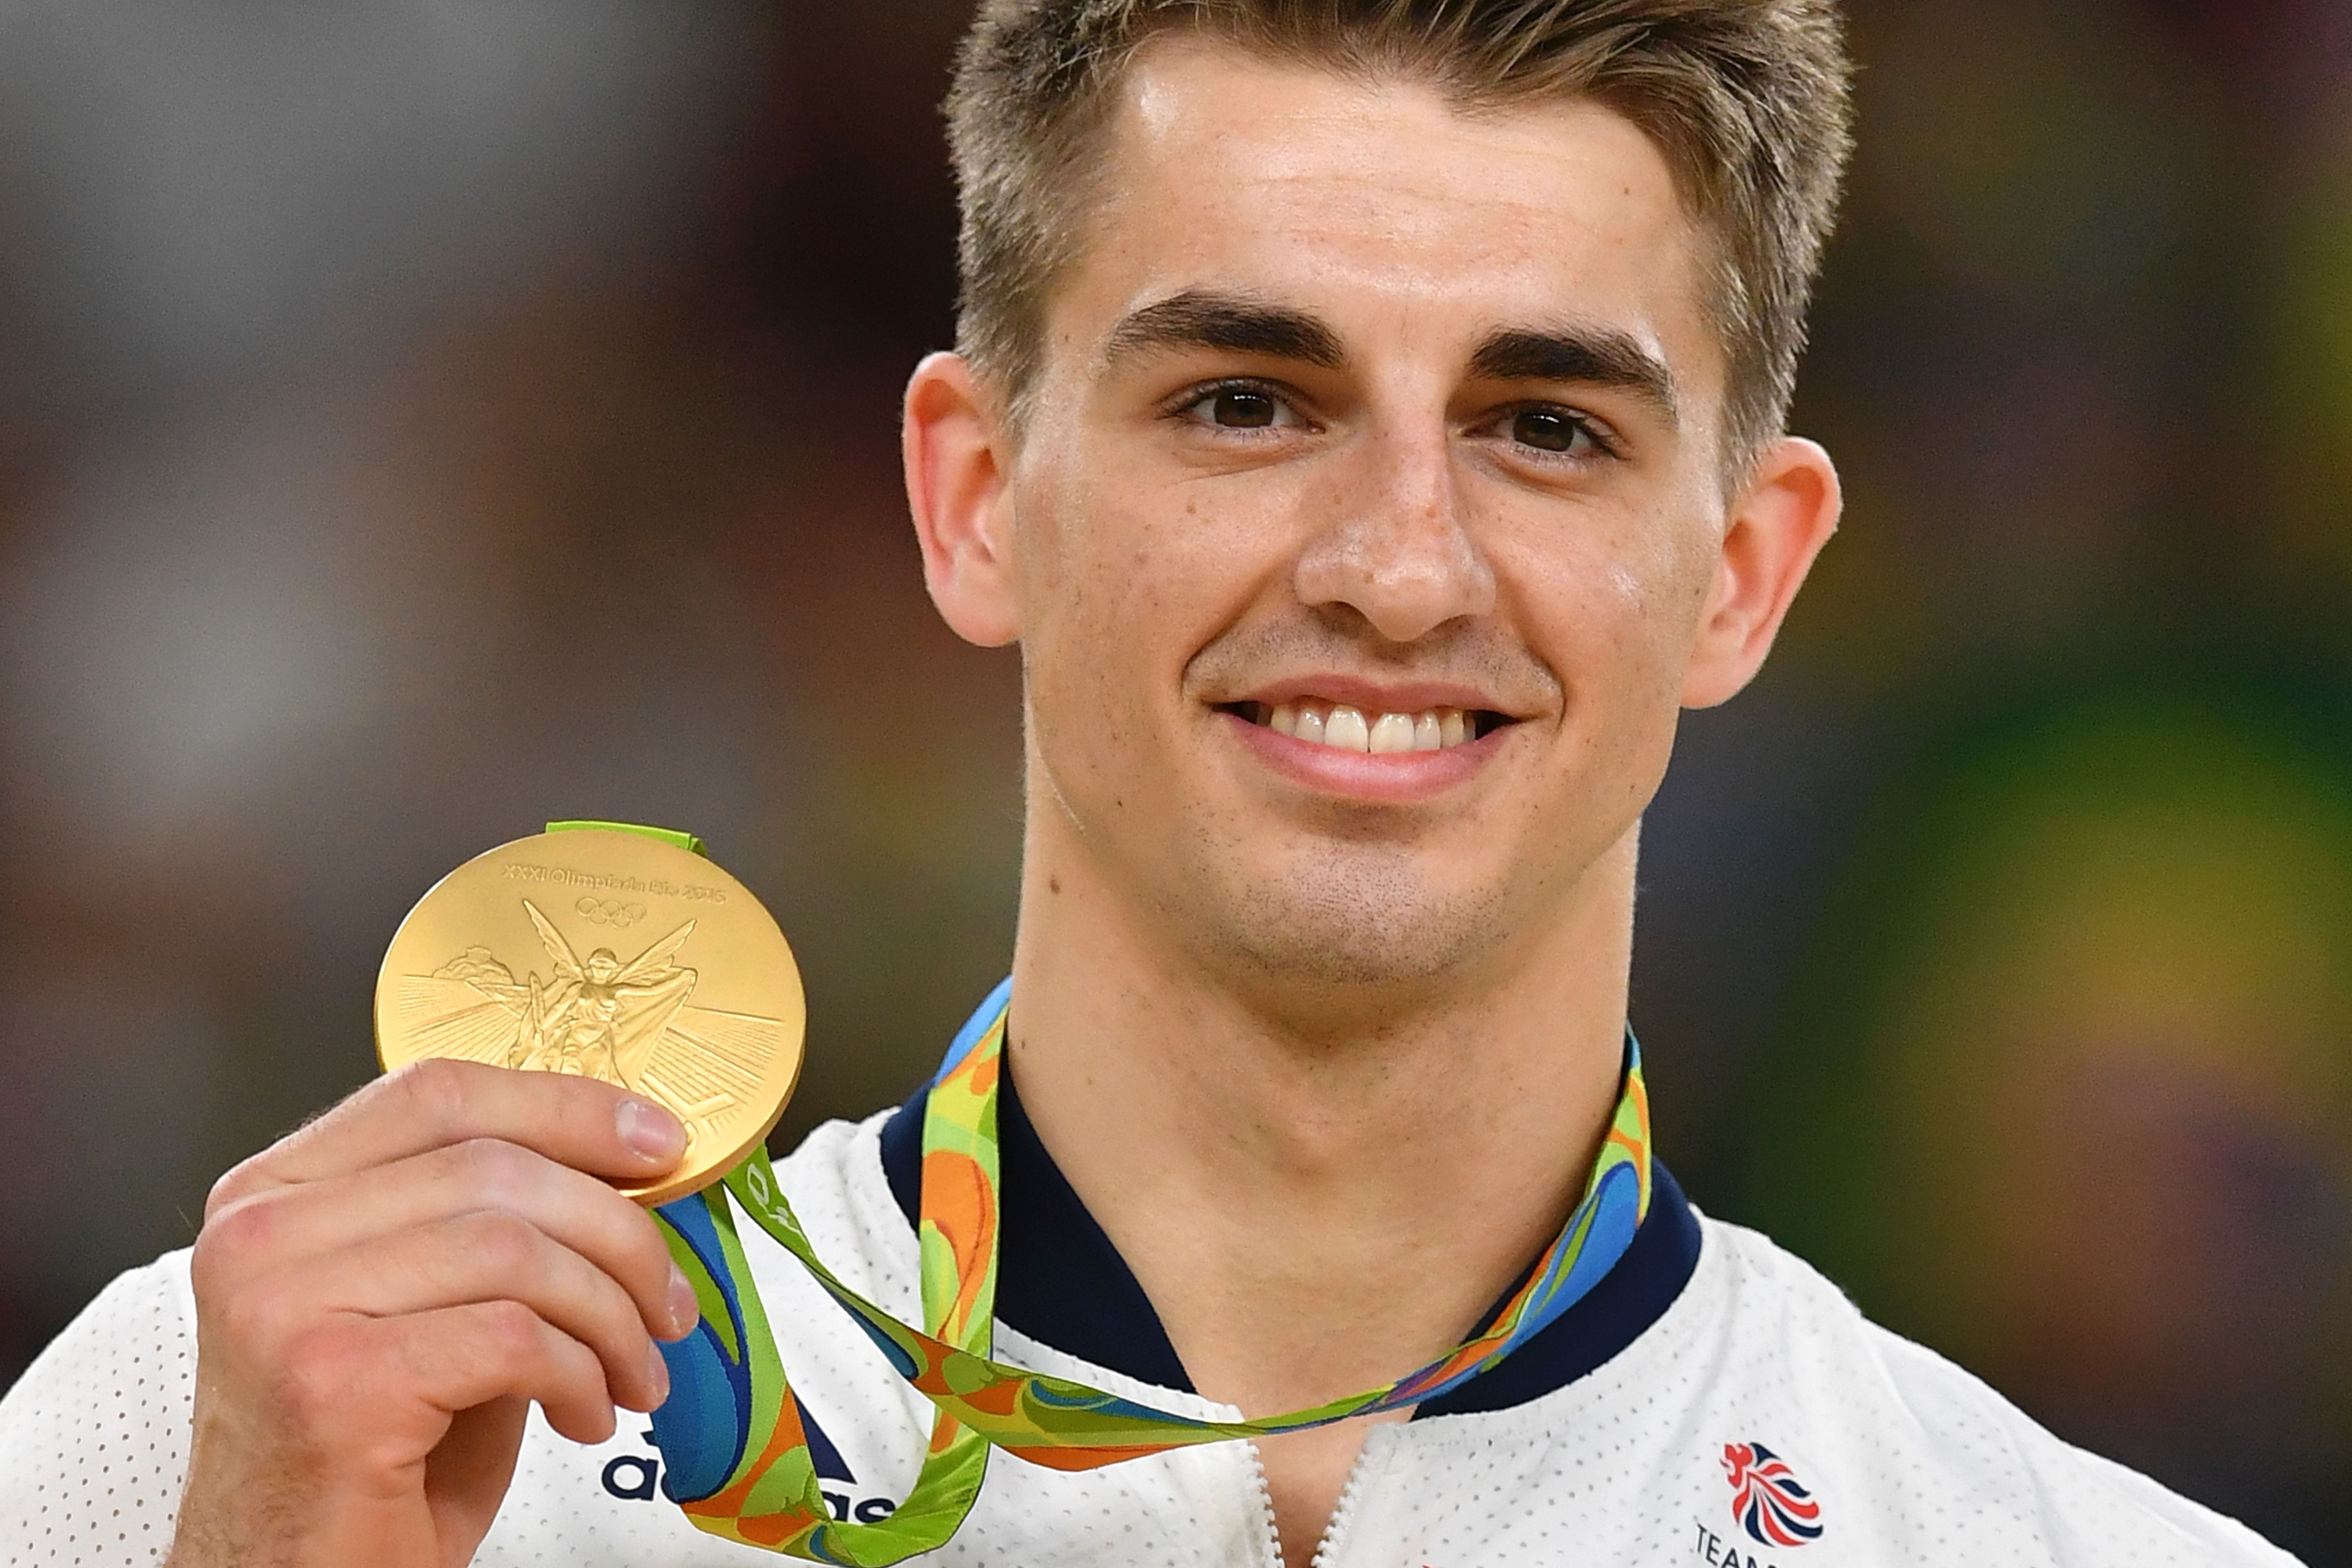 Max Whitlock wins bronze in dramatic individual all-round 